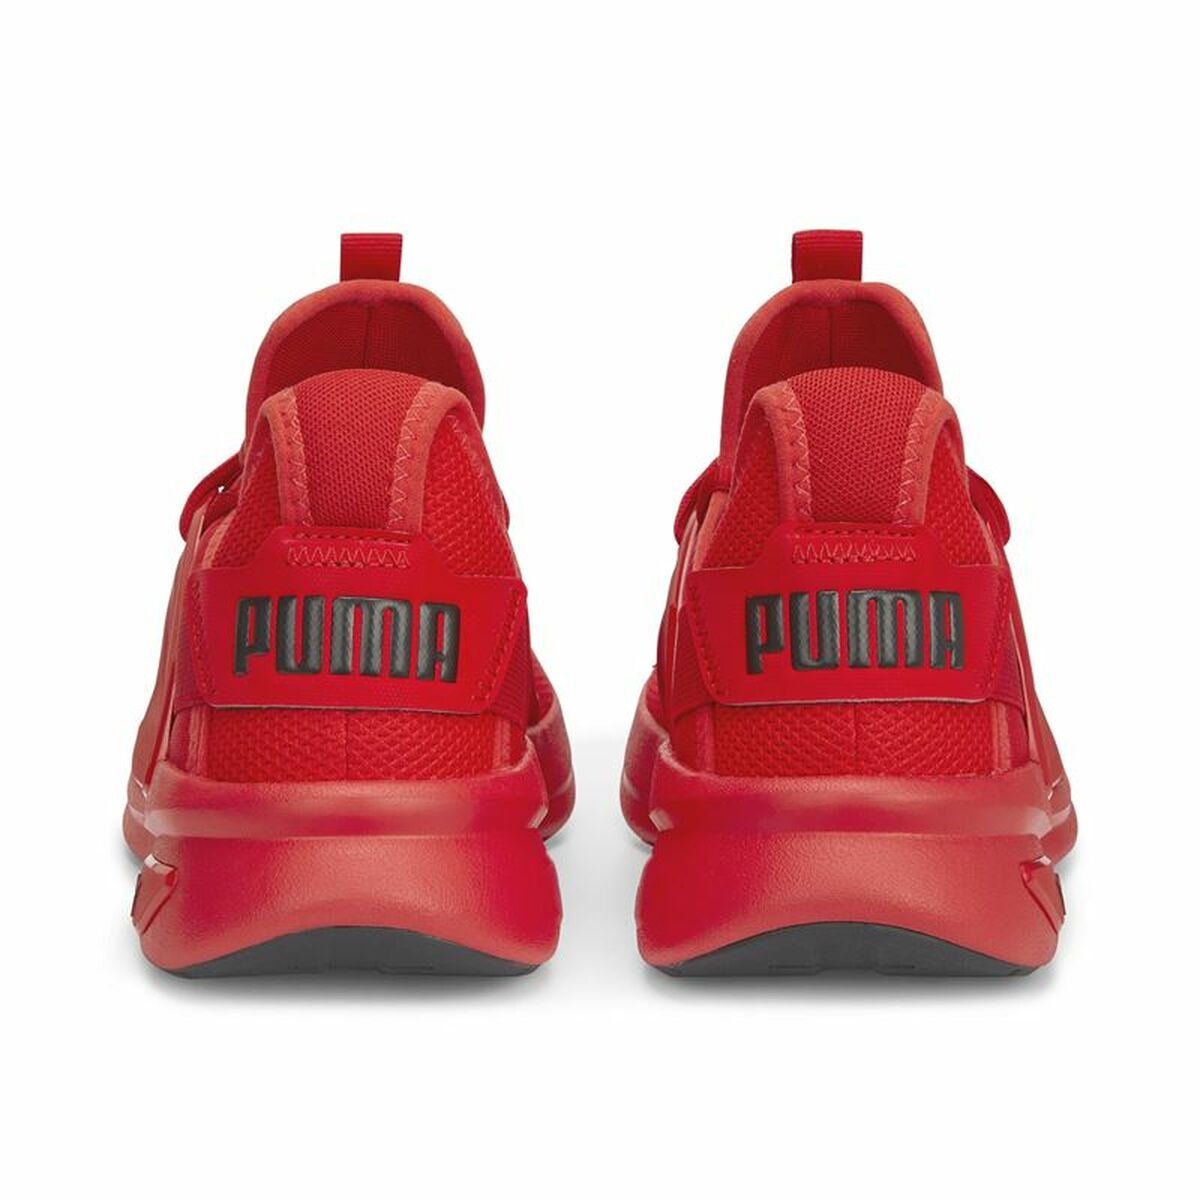 Chaussures de Running pour Adultes Puma Softride Enzo Evo Better Rouge Homme